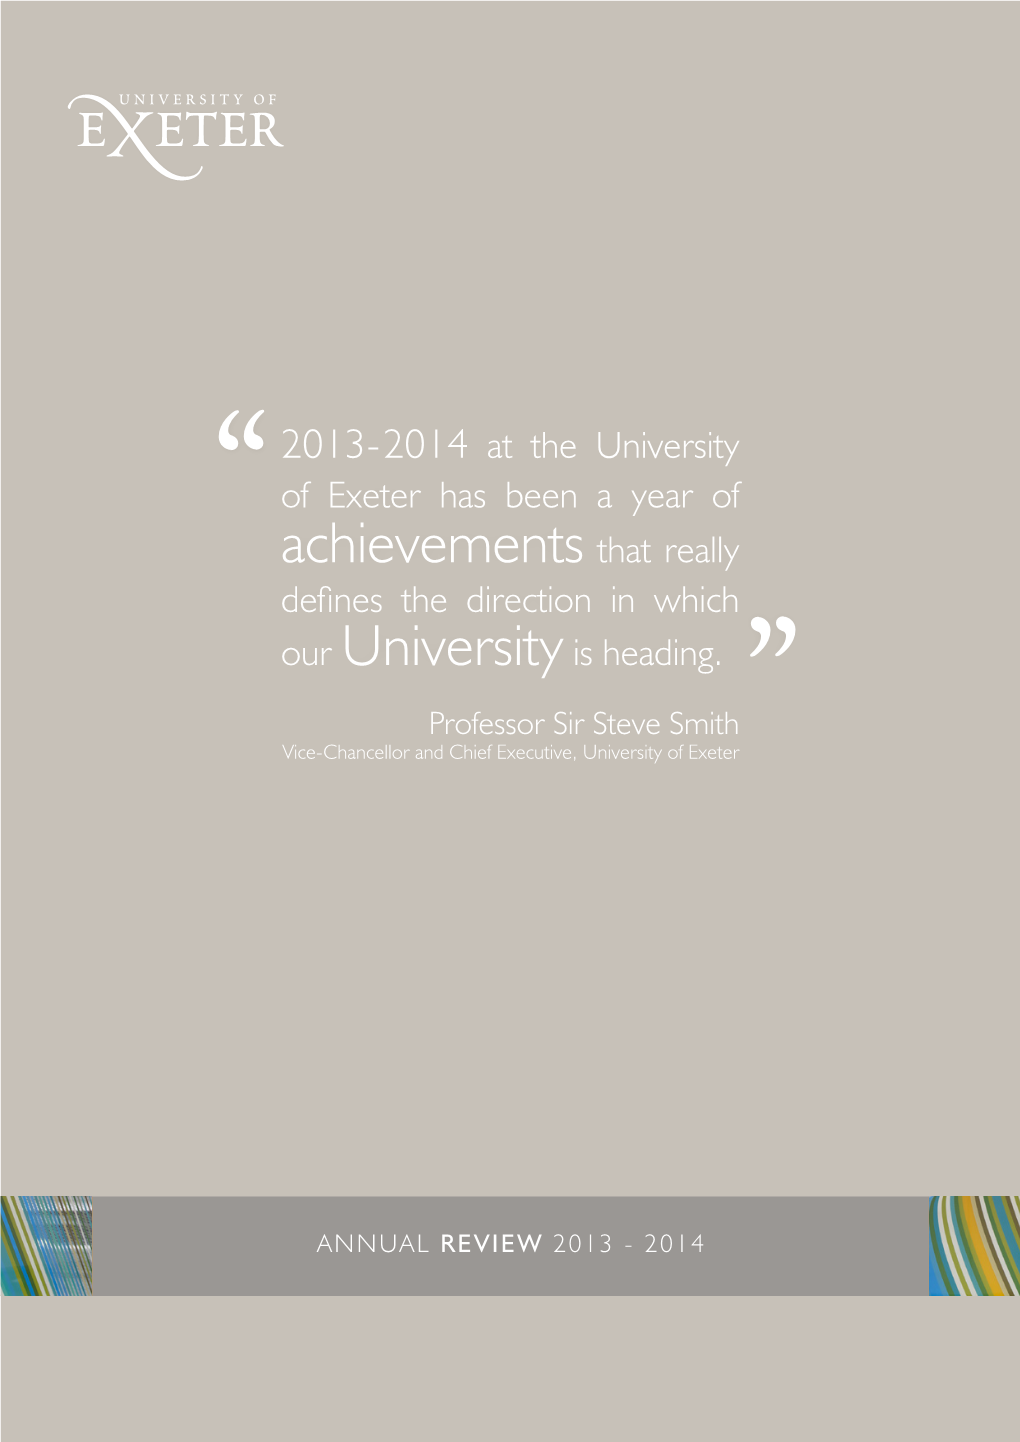 Achievements That Really “ Defines the Direction in Which Our University Is Heading